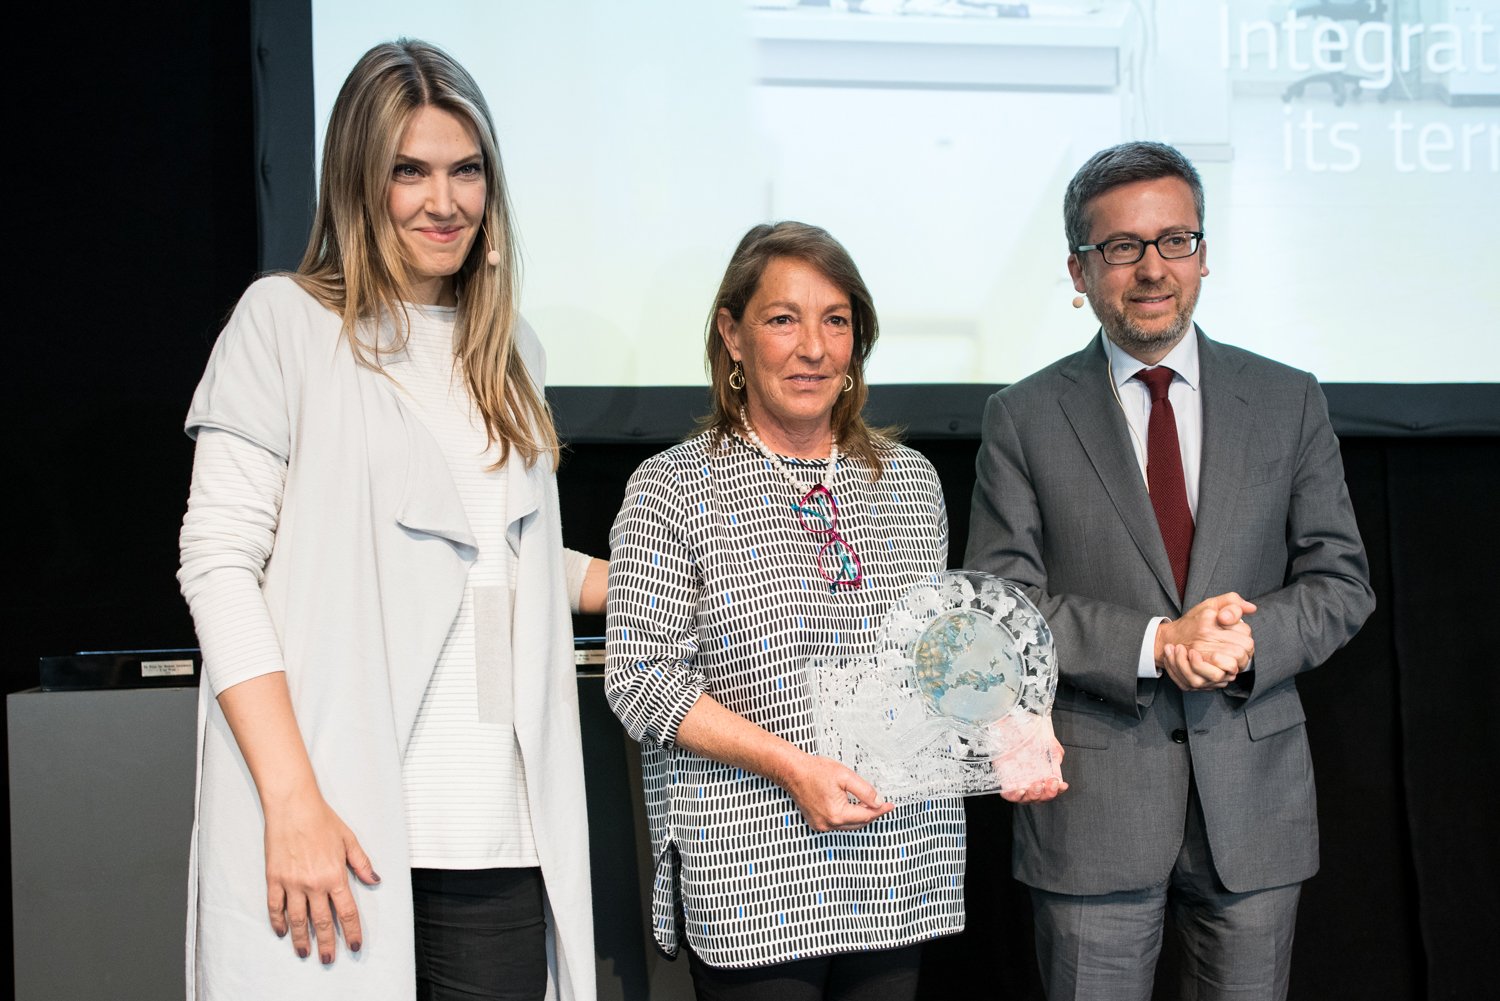 First prize was awarded to Dr Gabriella Colucci, whose companies identify active plant-based molecules for the cosmetics industry.